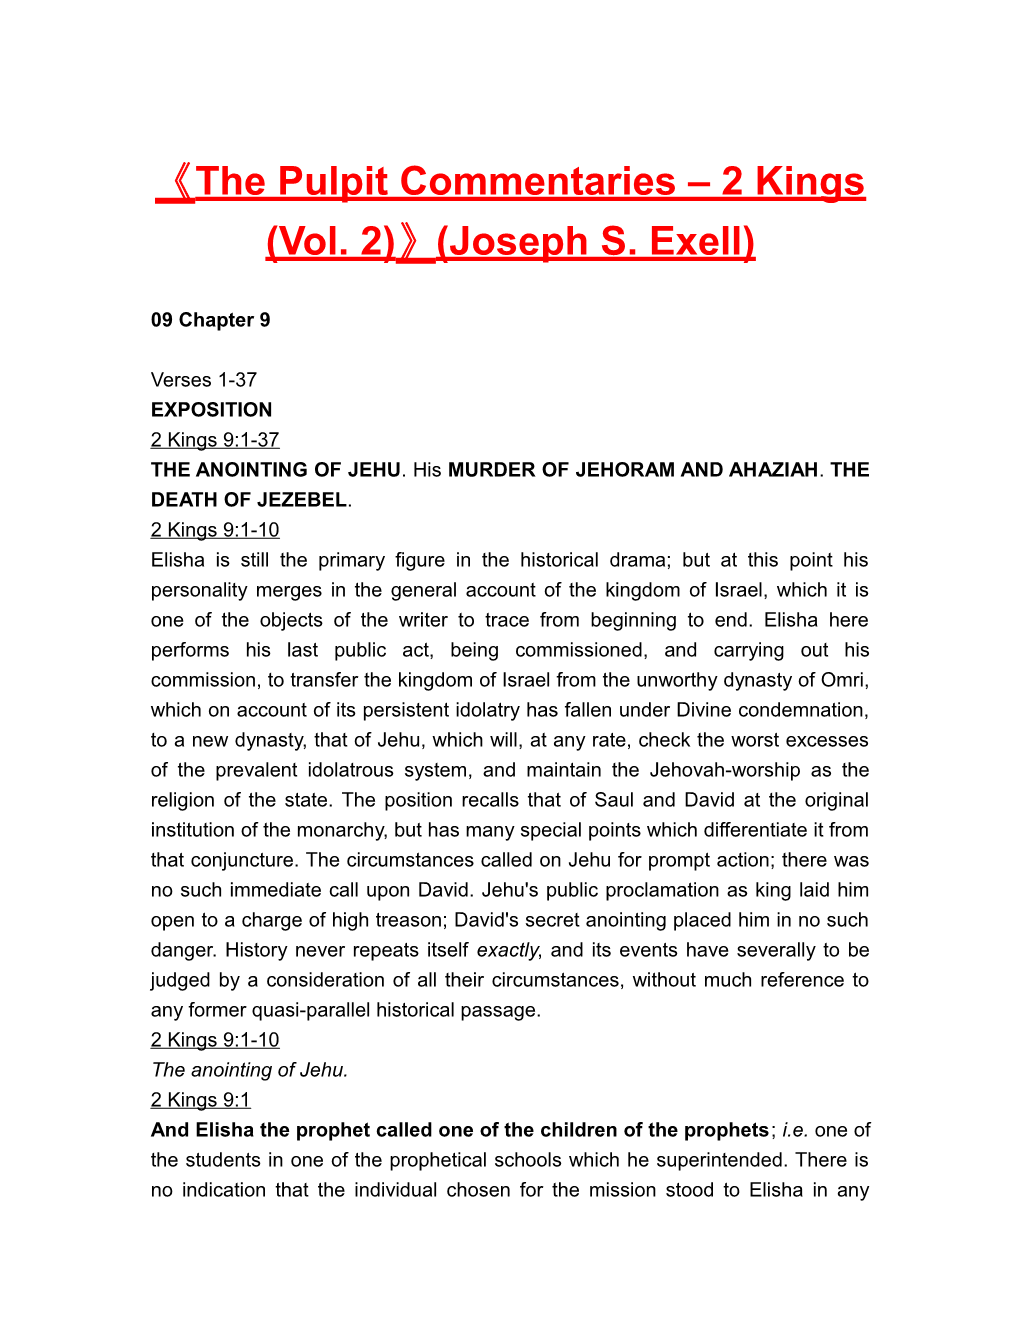 The Pulpit Commentaries 2 Kings (Vol. 2) (Joseph S. Exell)